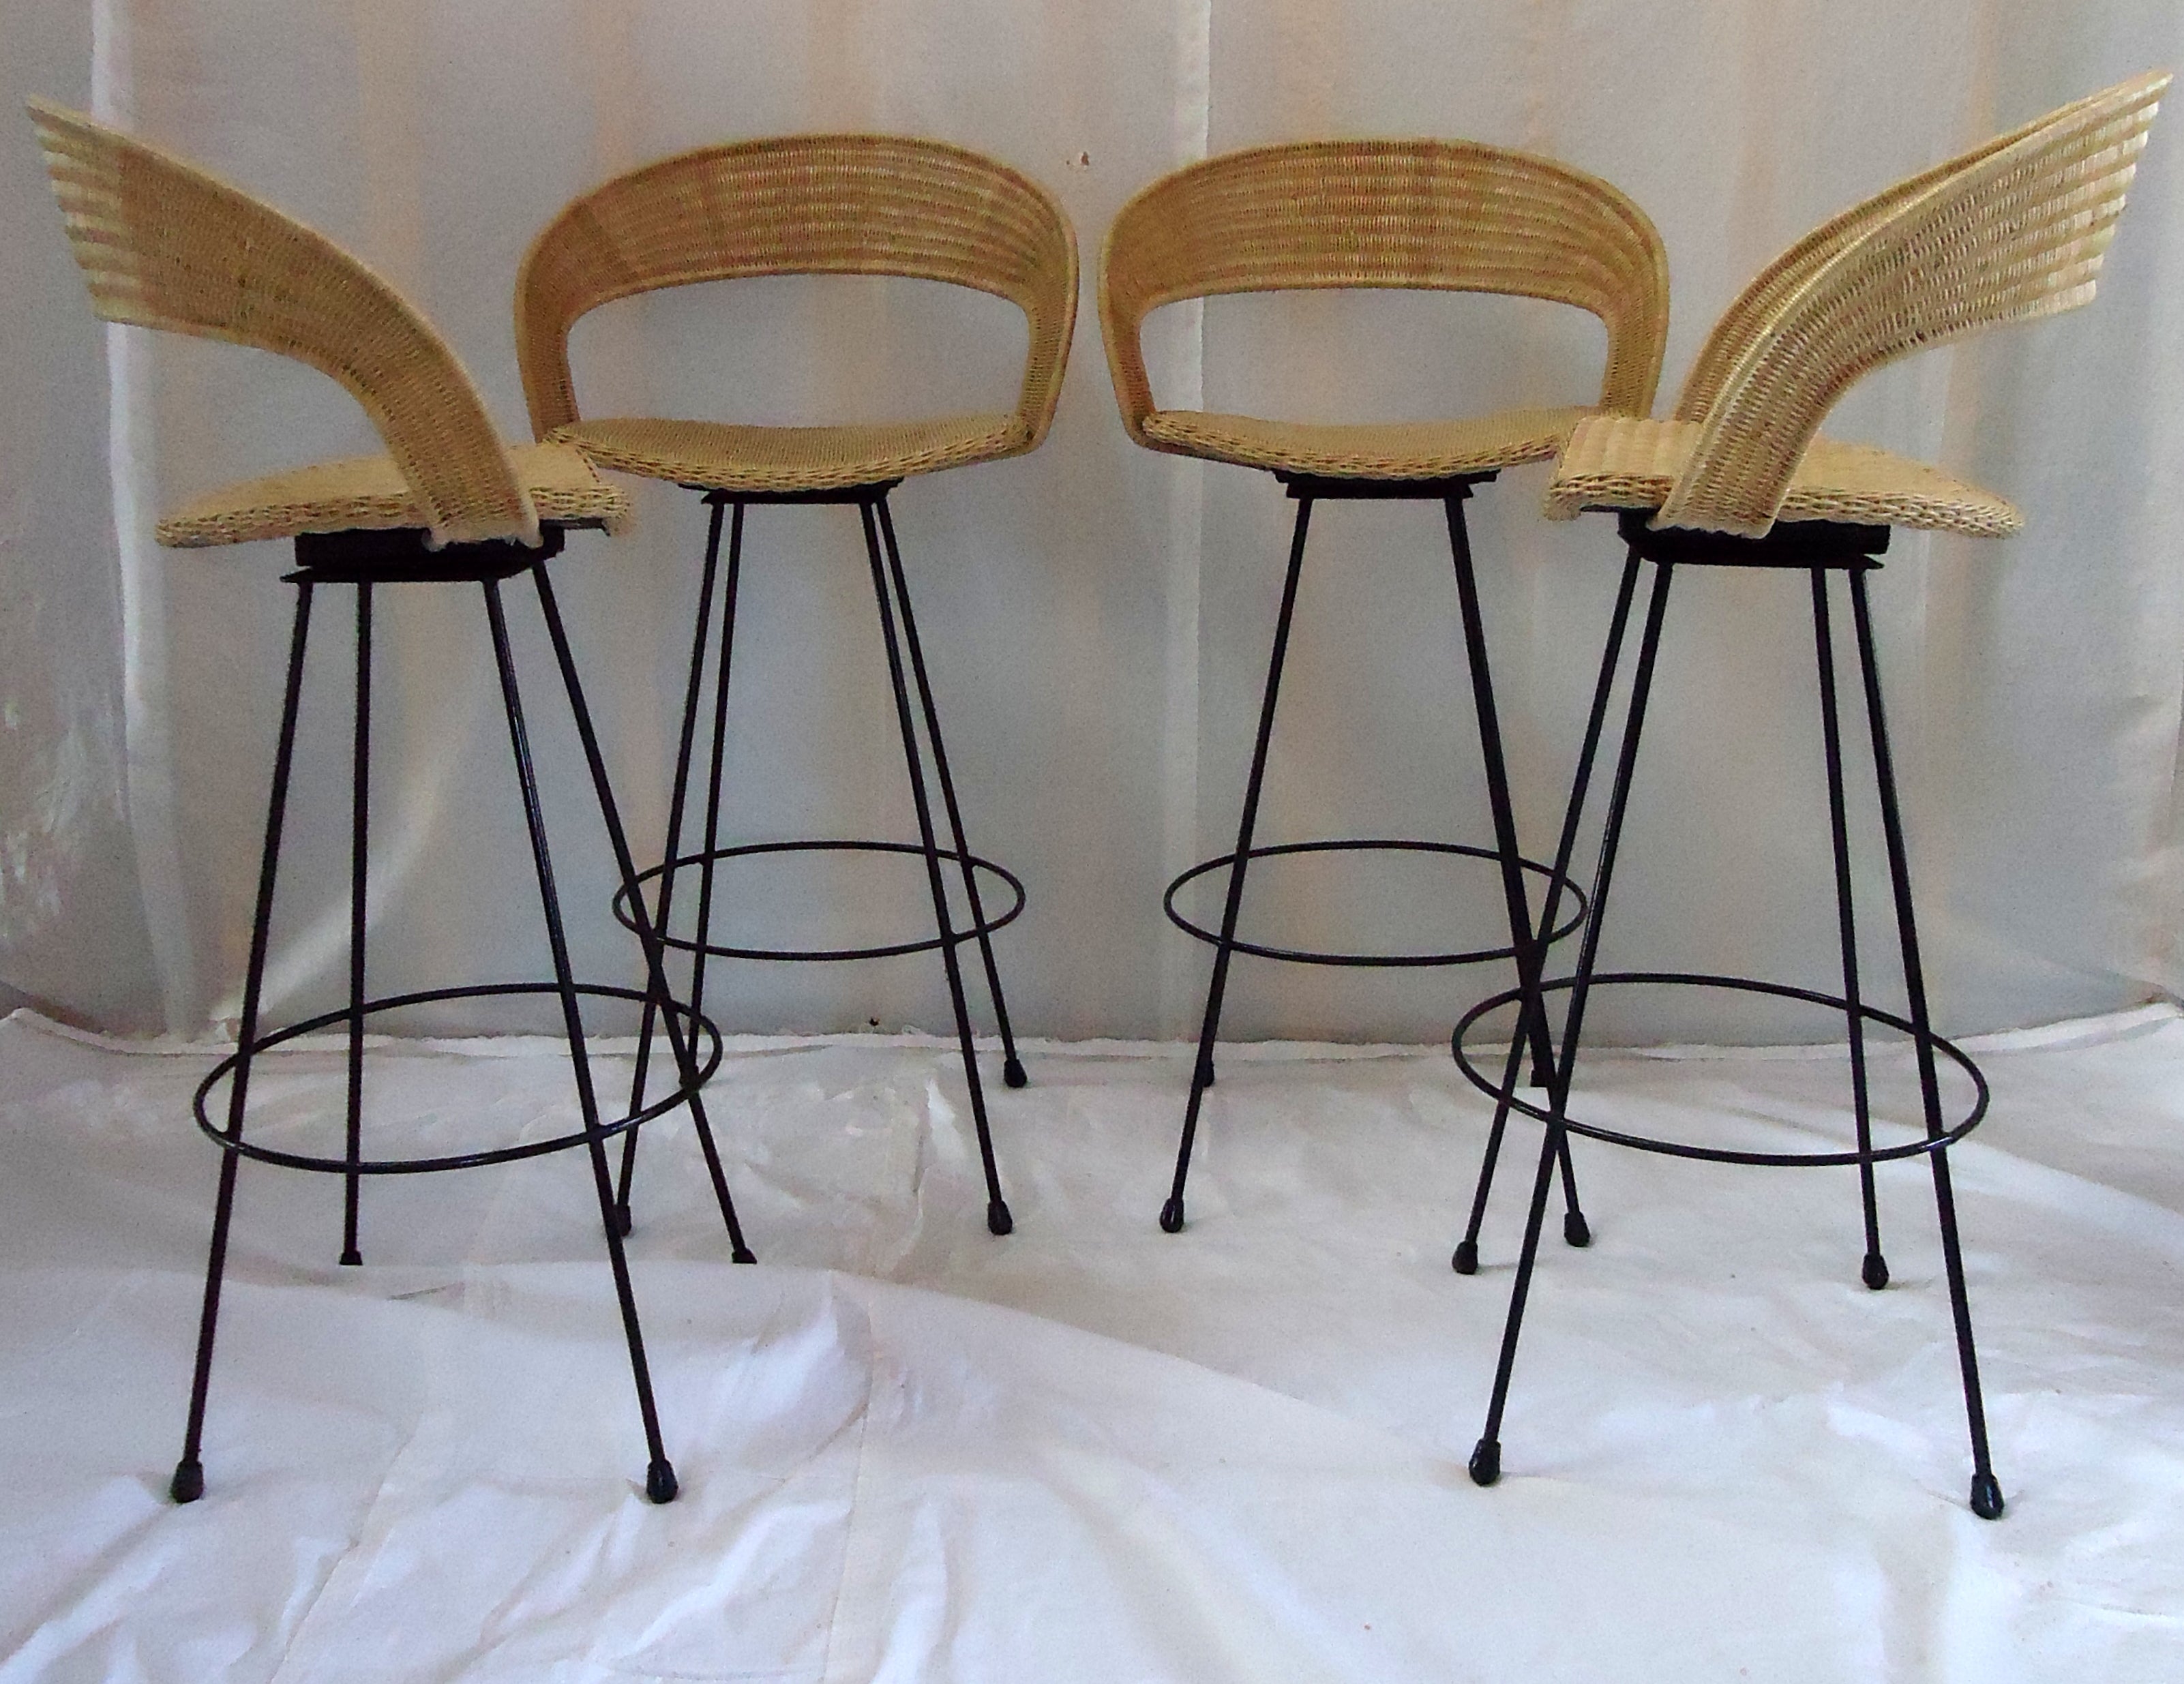 Wicker and Wrought Iron Barstools c. 1960